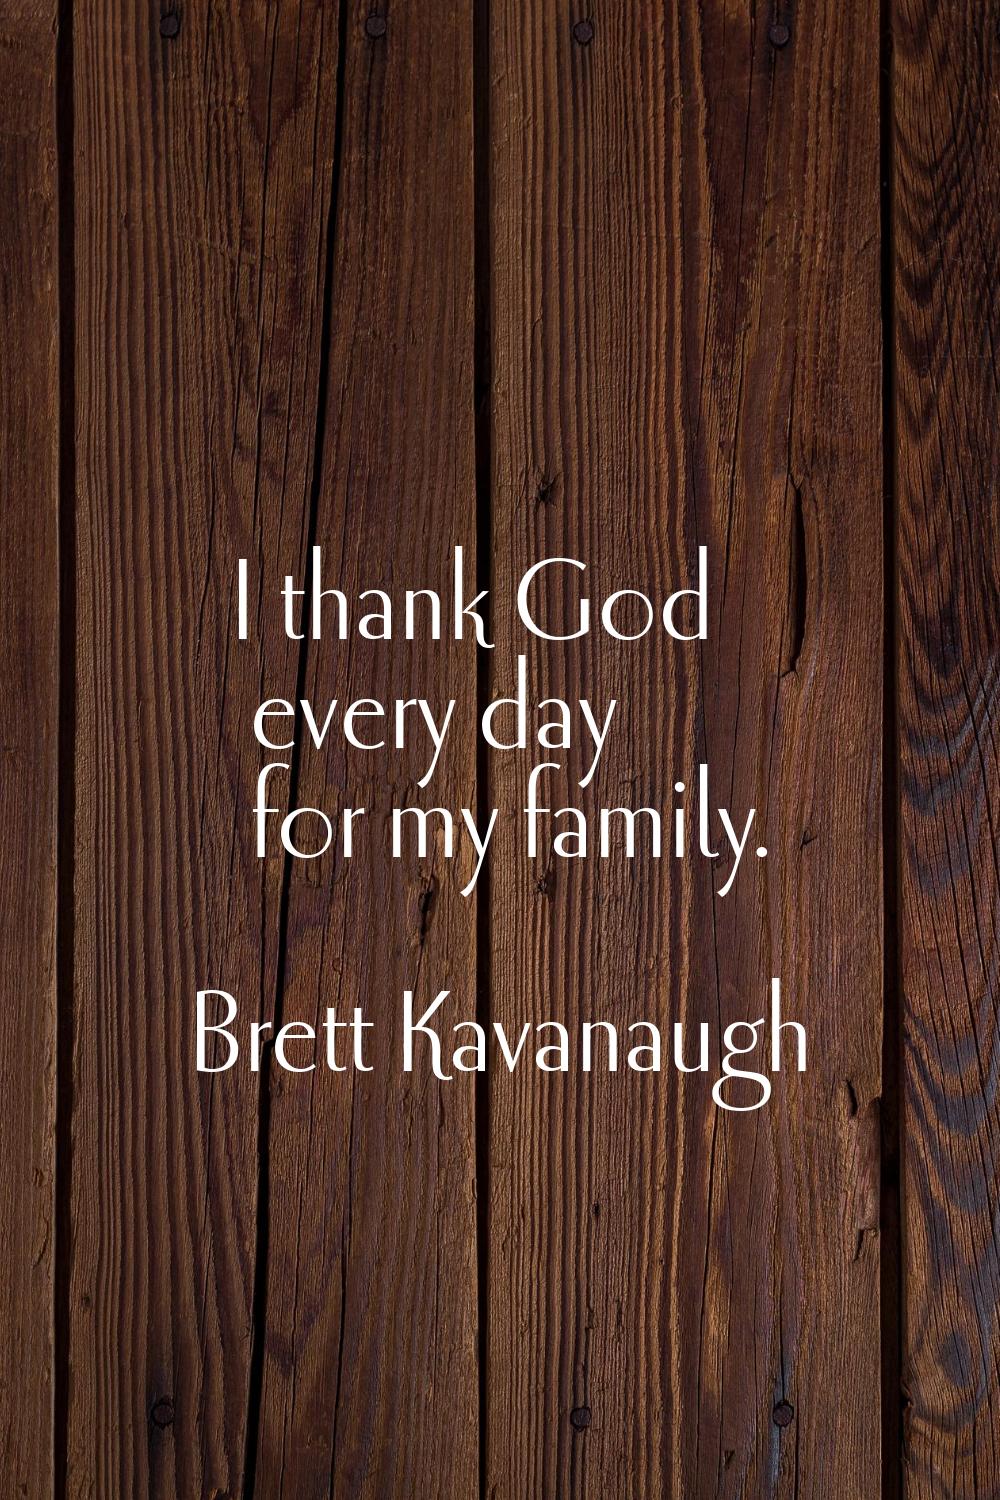 I thank God every day for my family.